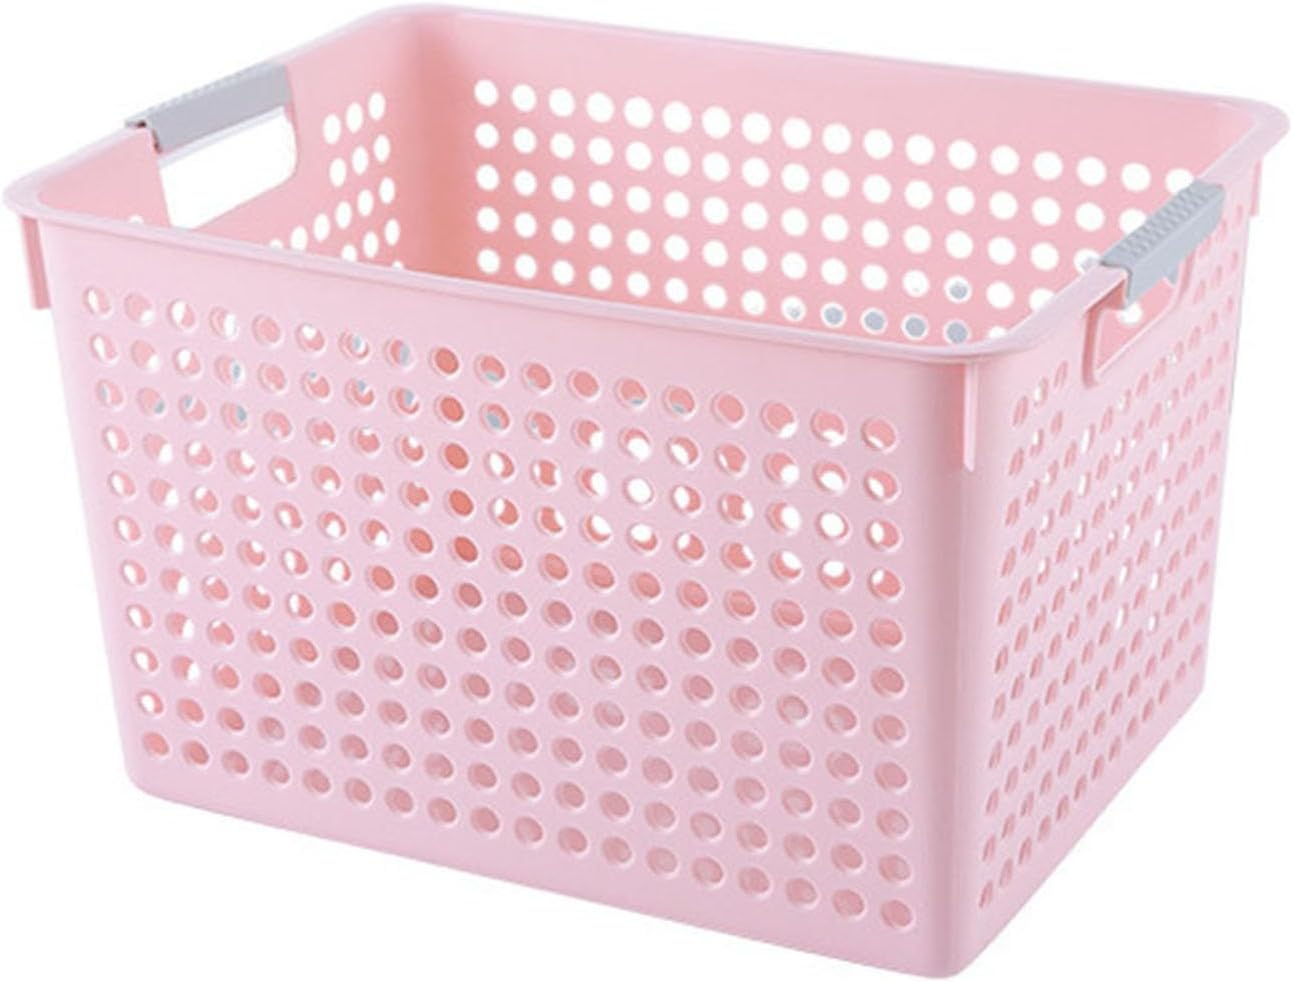 Decorative Storage Basket Laundry Room Versatile Hollow Design Space-saving Sundries Organizer for Cosmetics Clothes Toys Pink S